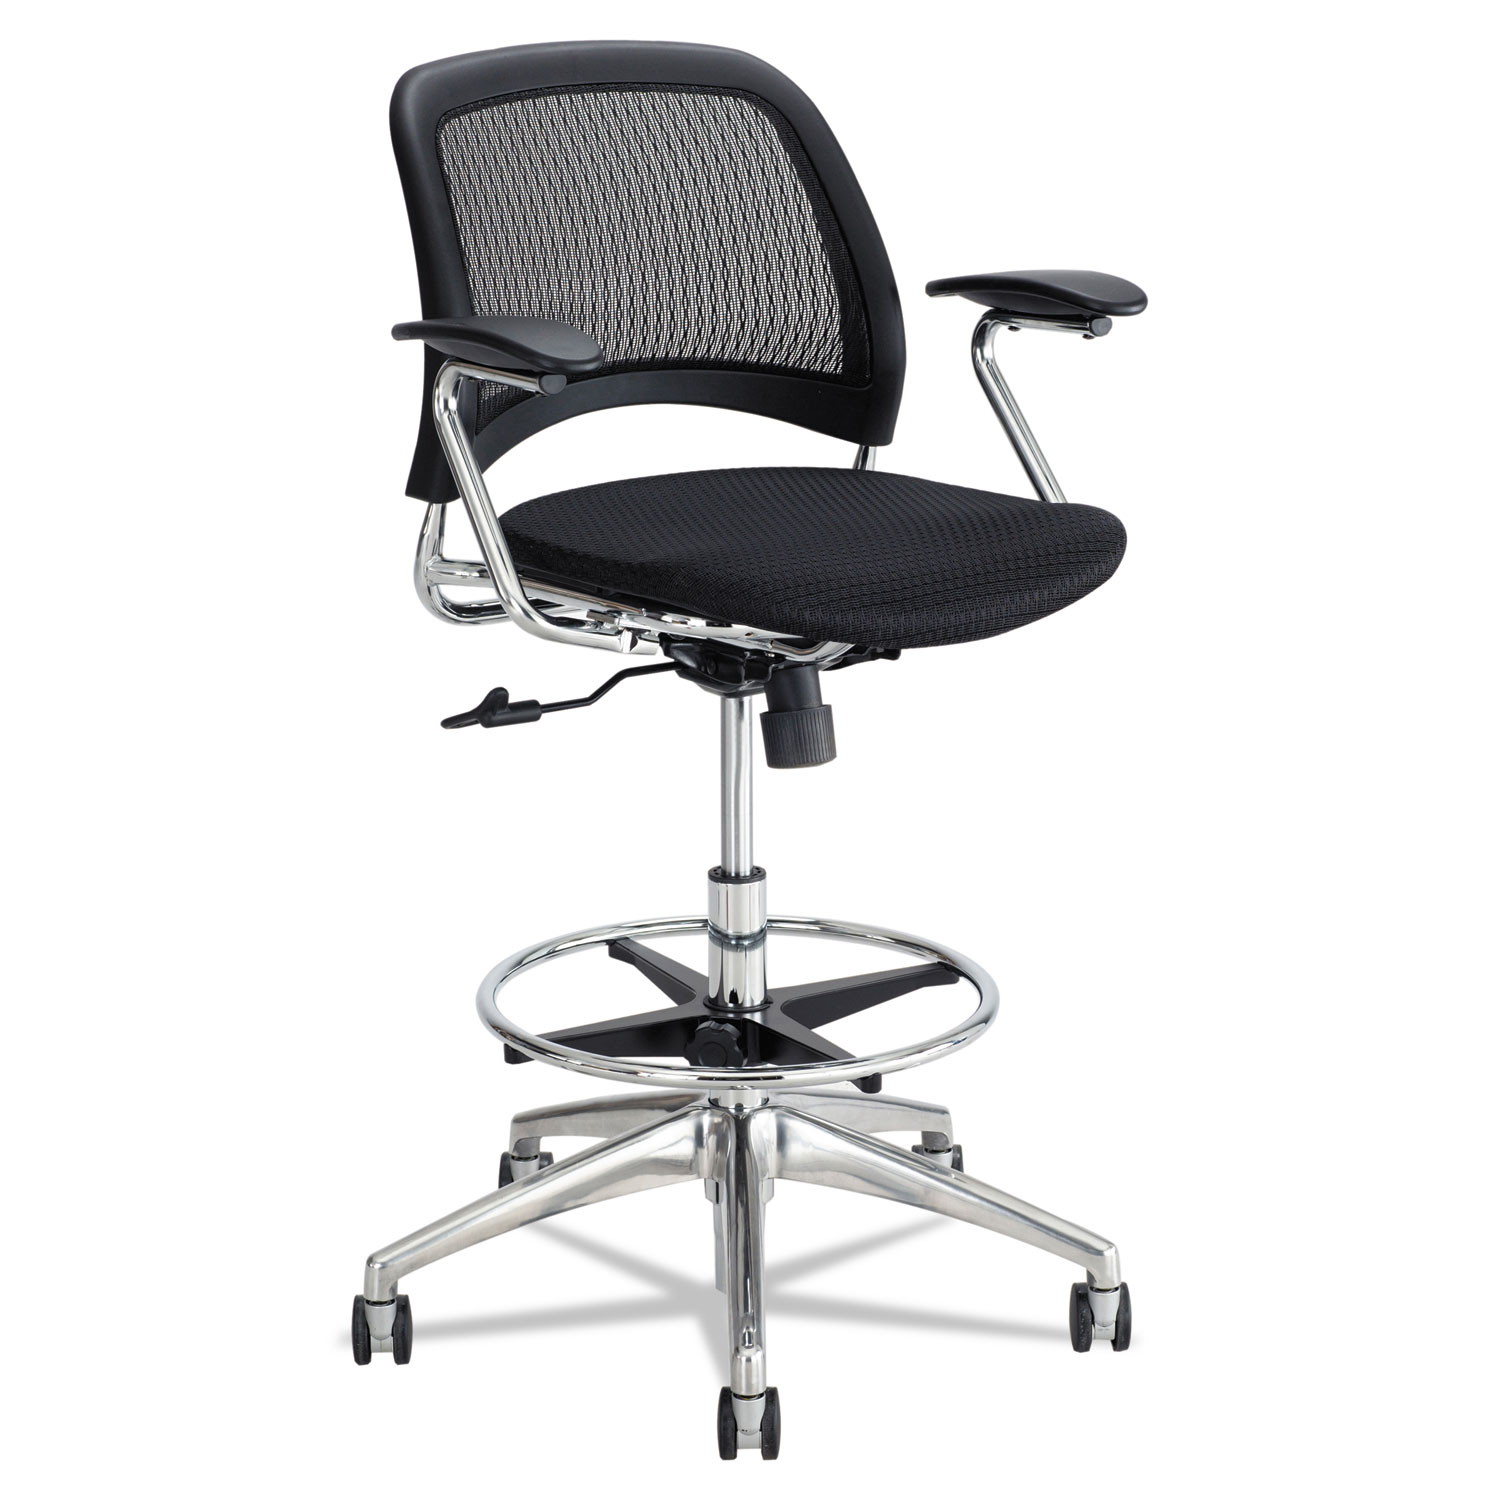  Safco 6820BL Reve Mesh Extended-Height Chair, Supports up to 250 lbs., Black Seat/Black Back, Chrome Base (SAF6820BL) 